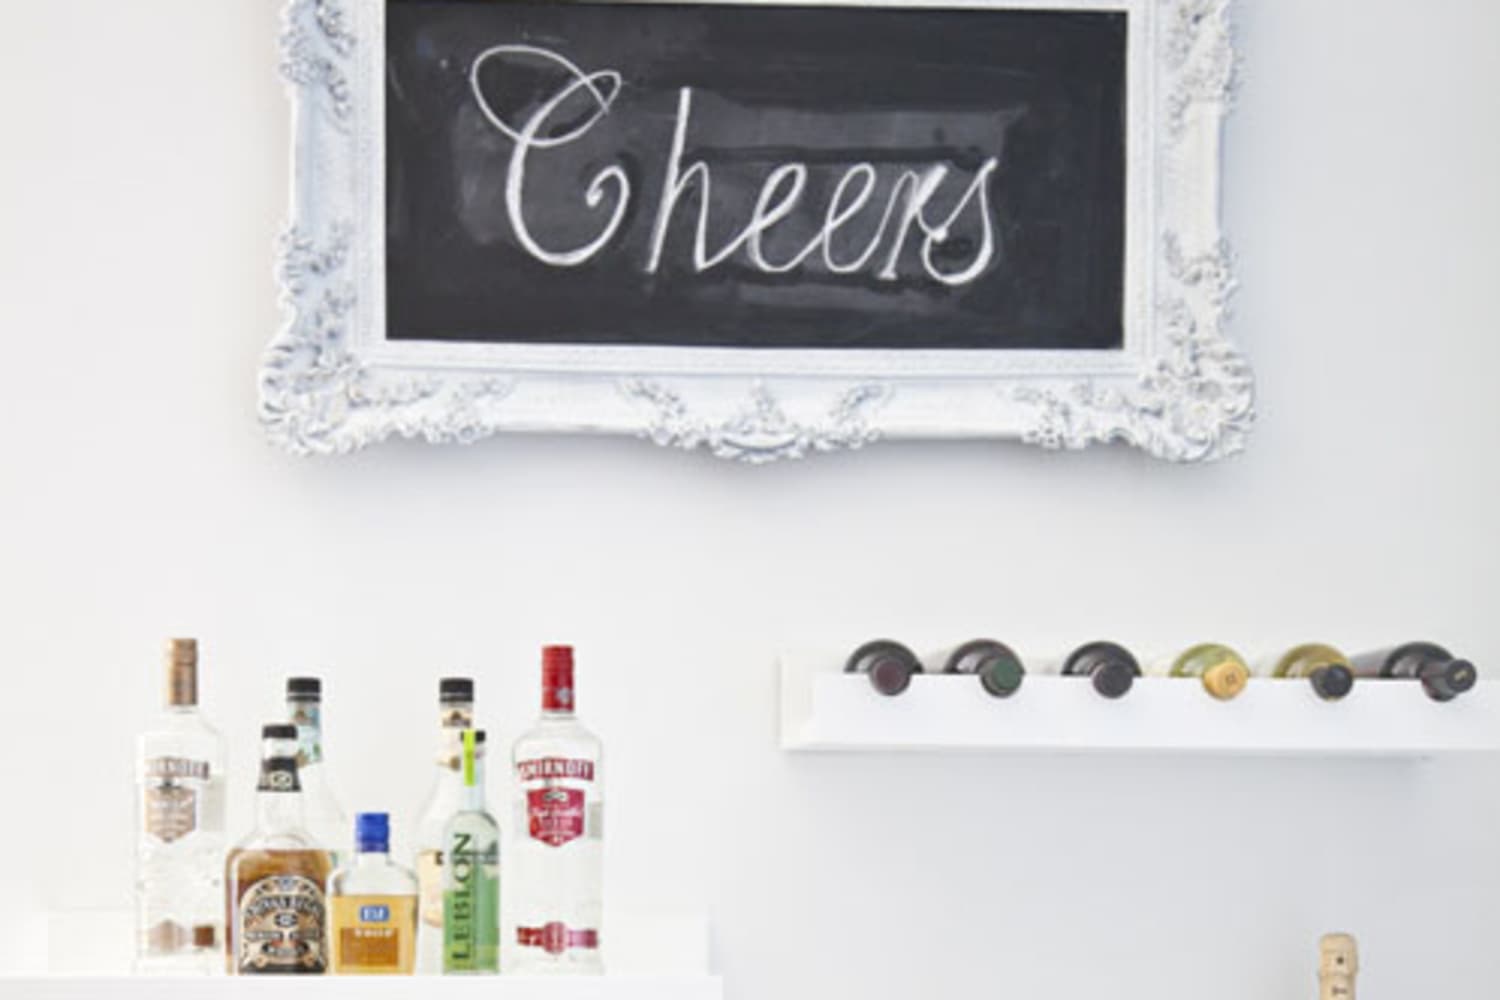 16 Mixers Every Home Bar Should Have Stocked At All Times